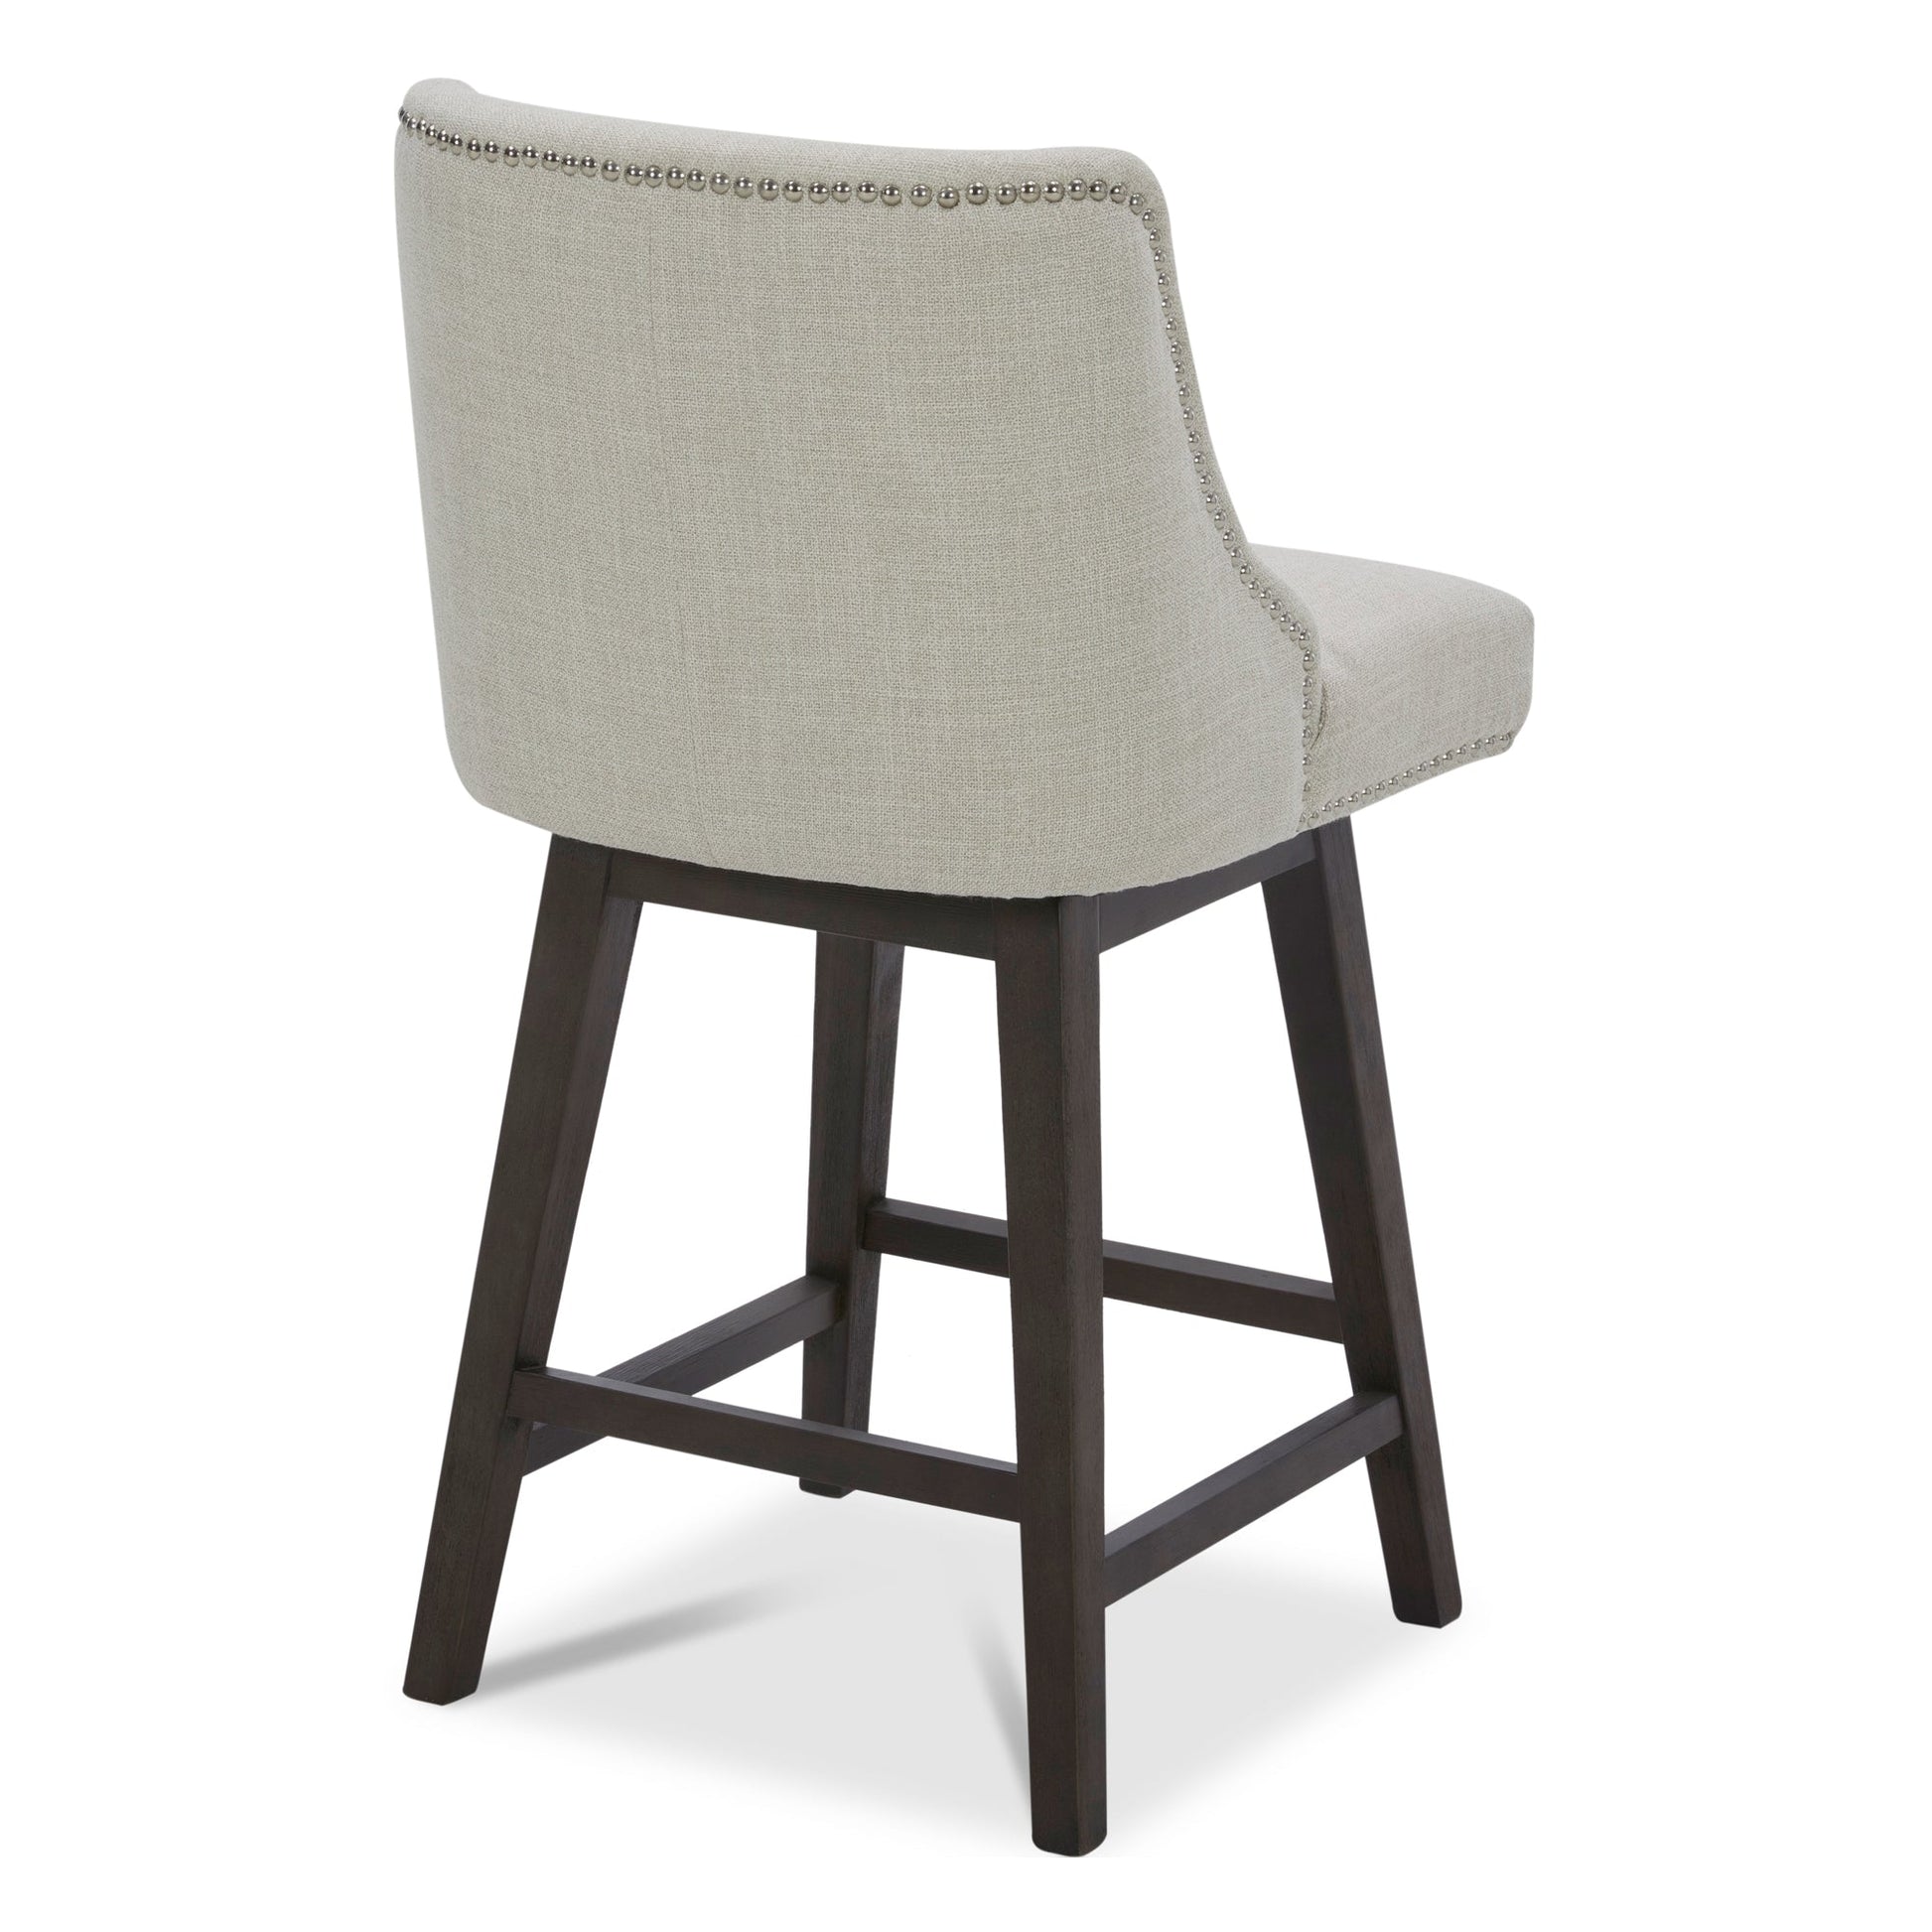 CHITA LIVING-Asher Swivel Counter Stool with Nailhead Trim-Counter Stools-Performance Fabric-Linen (Performance Fabric)-